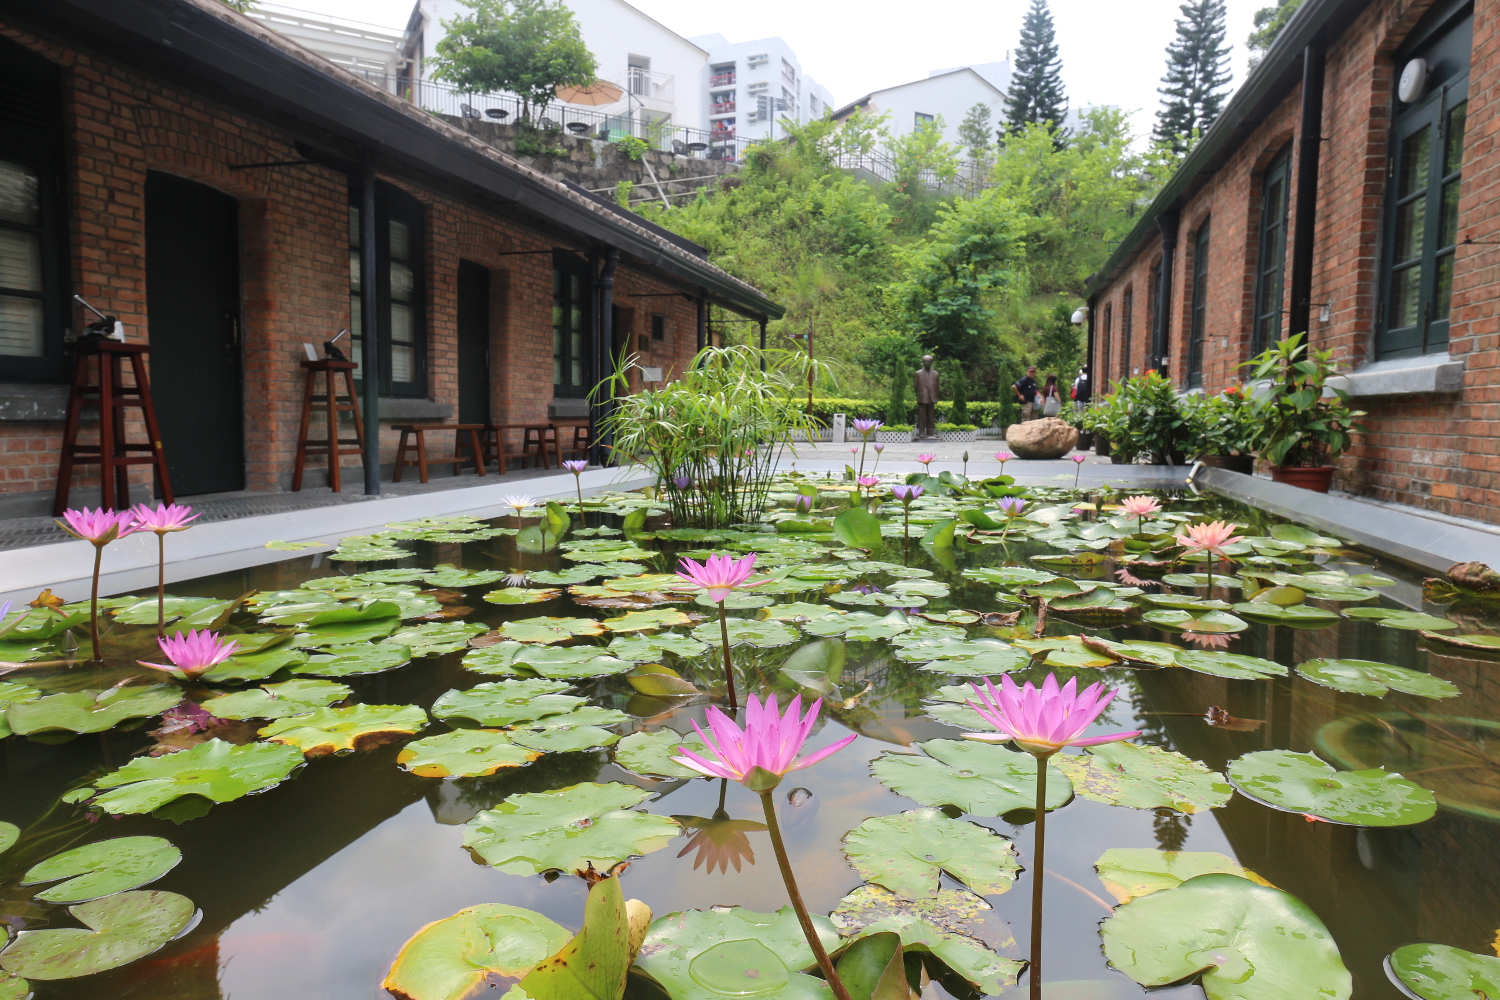 Picturesque sleep beside the lily pond at Jao Tsung-I Academy. Image by Piera Chen / londoninfopage